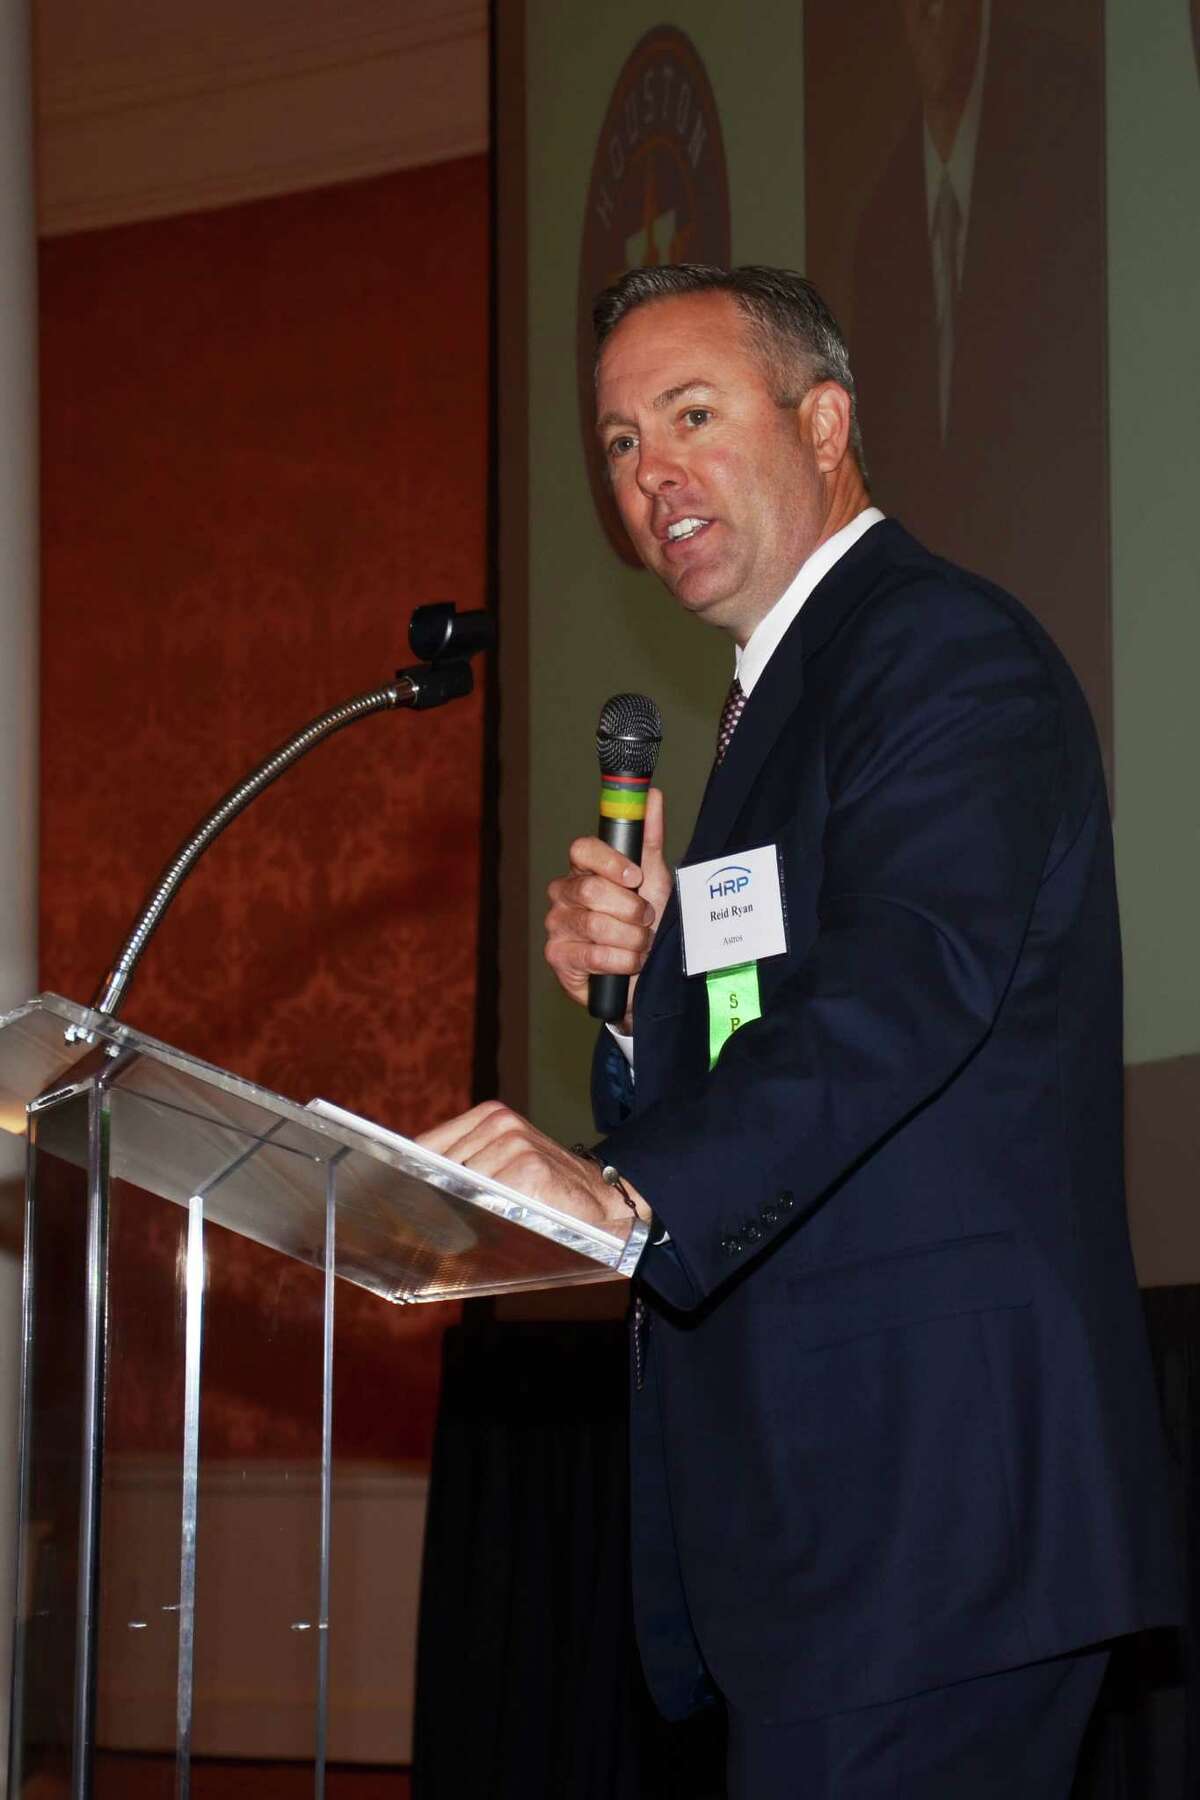 Reid Ryan spoke at the Houston Relocation Professionals' spring educational event.